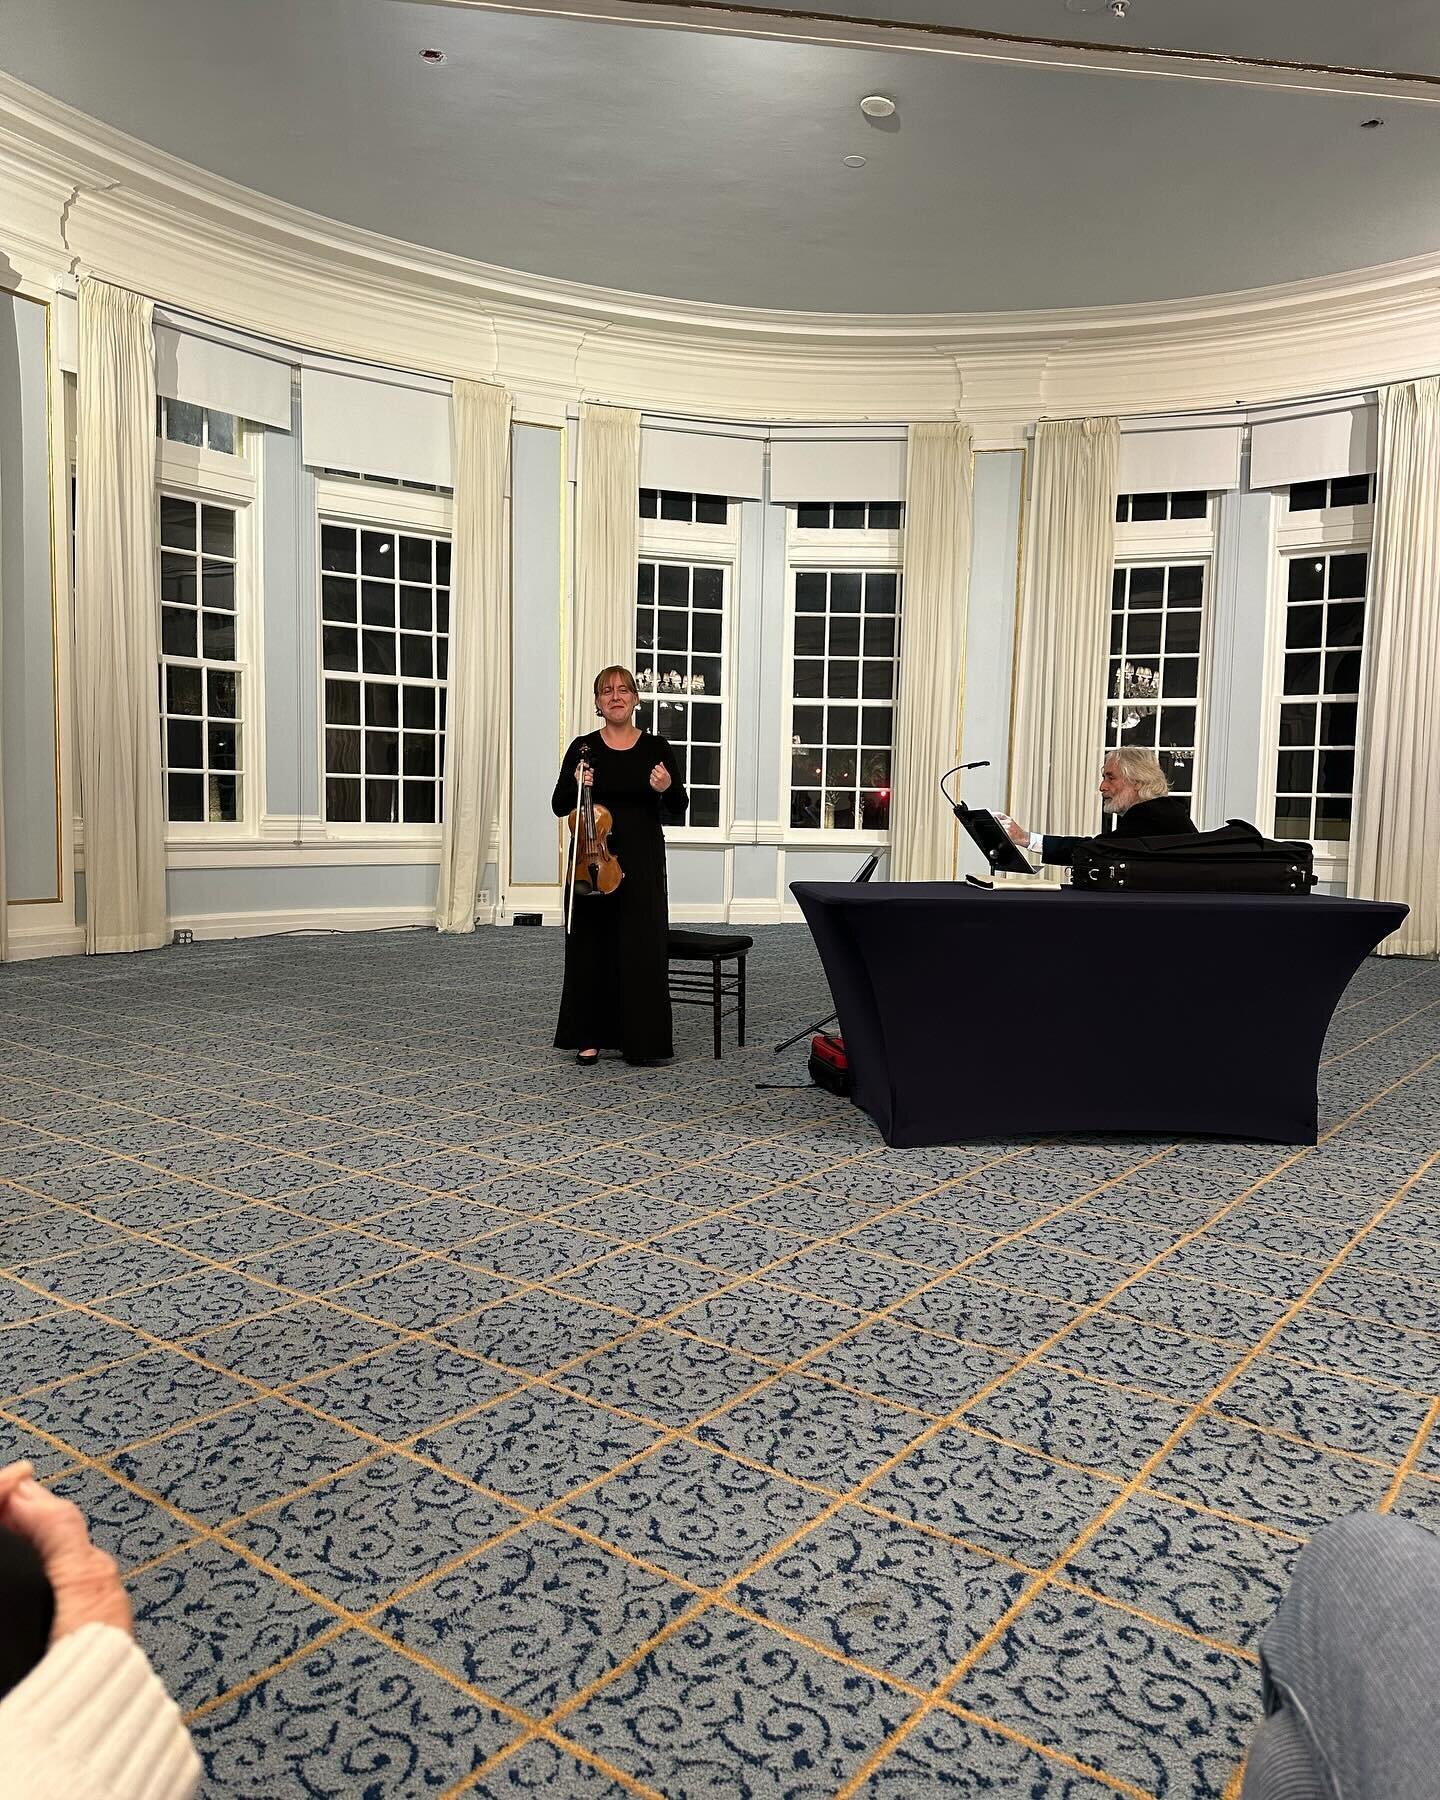 Celebrating with friends at the San Jacinto Neighborhood Assocation meeting.  Special performance by members of the Galveston Symphony.  I am excited to announce that I will be running for election in May 2024! #galvestonsymphony #sanjacintoneighborh